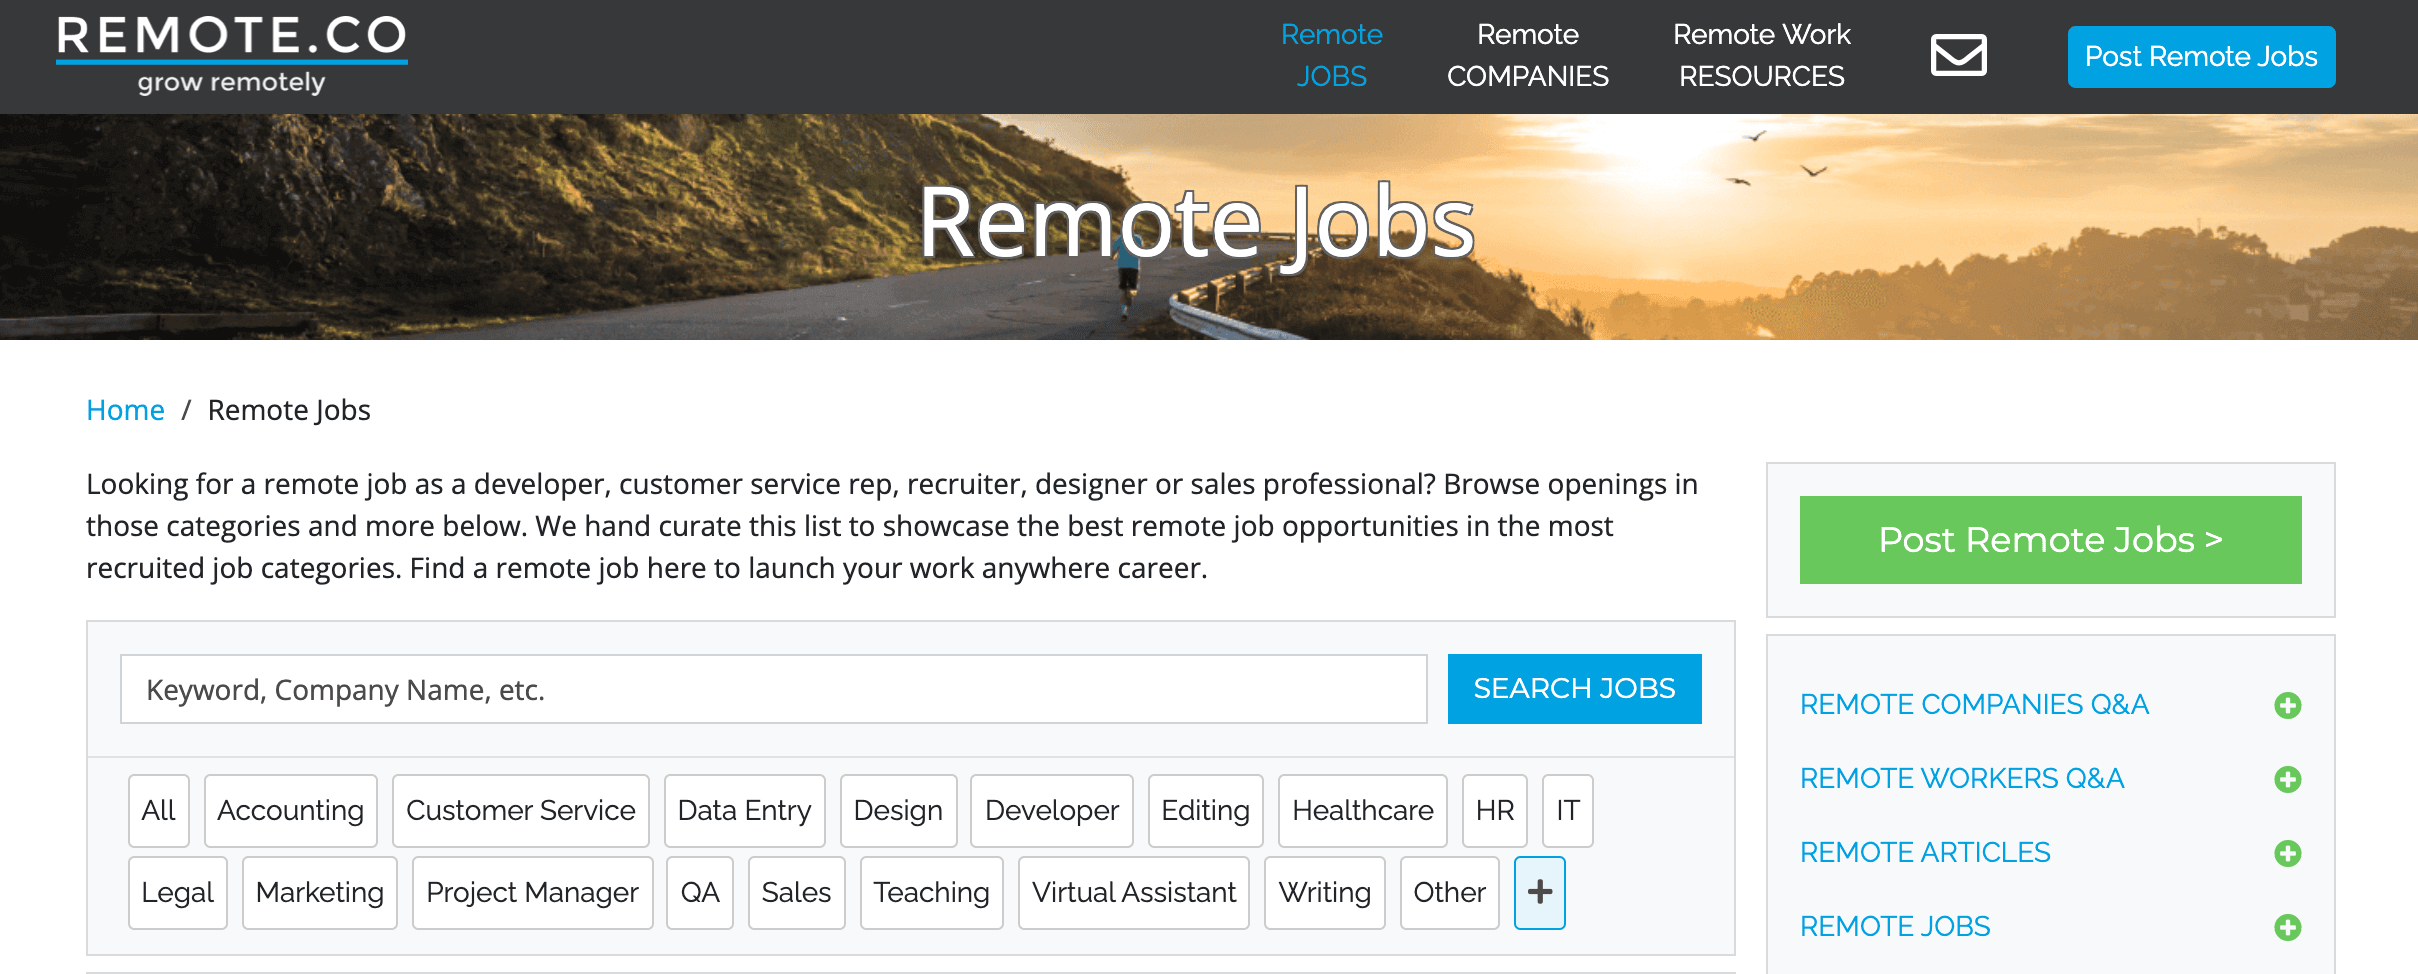 Remote.co, a great website to find remote jobs